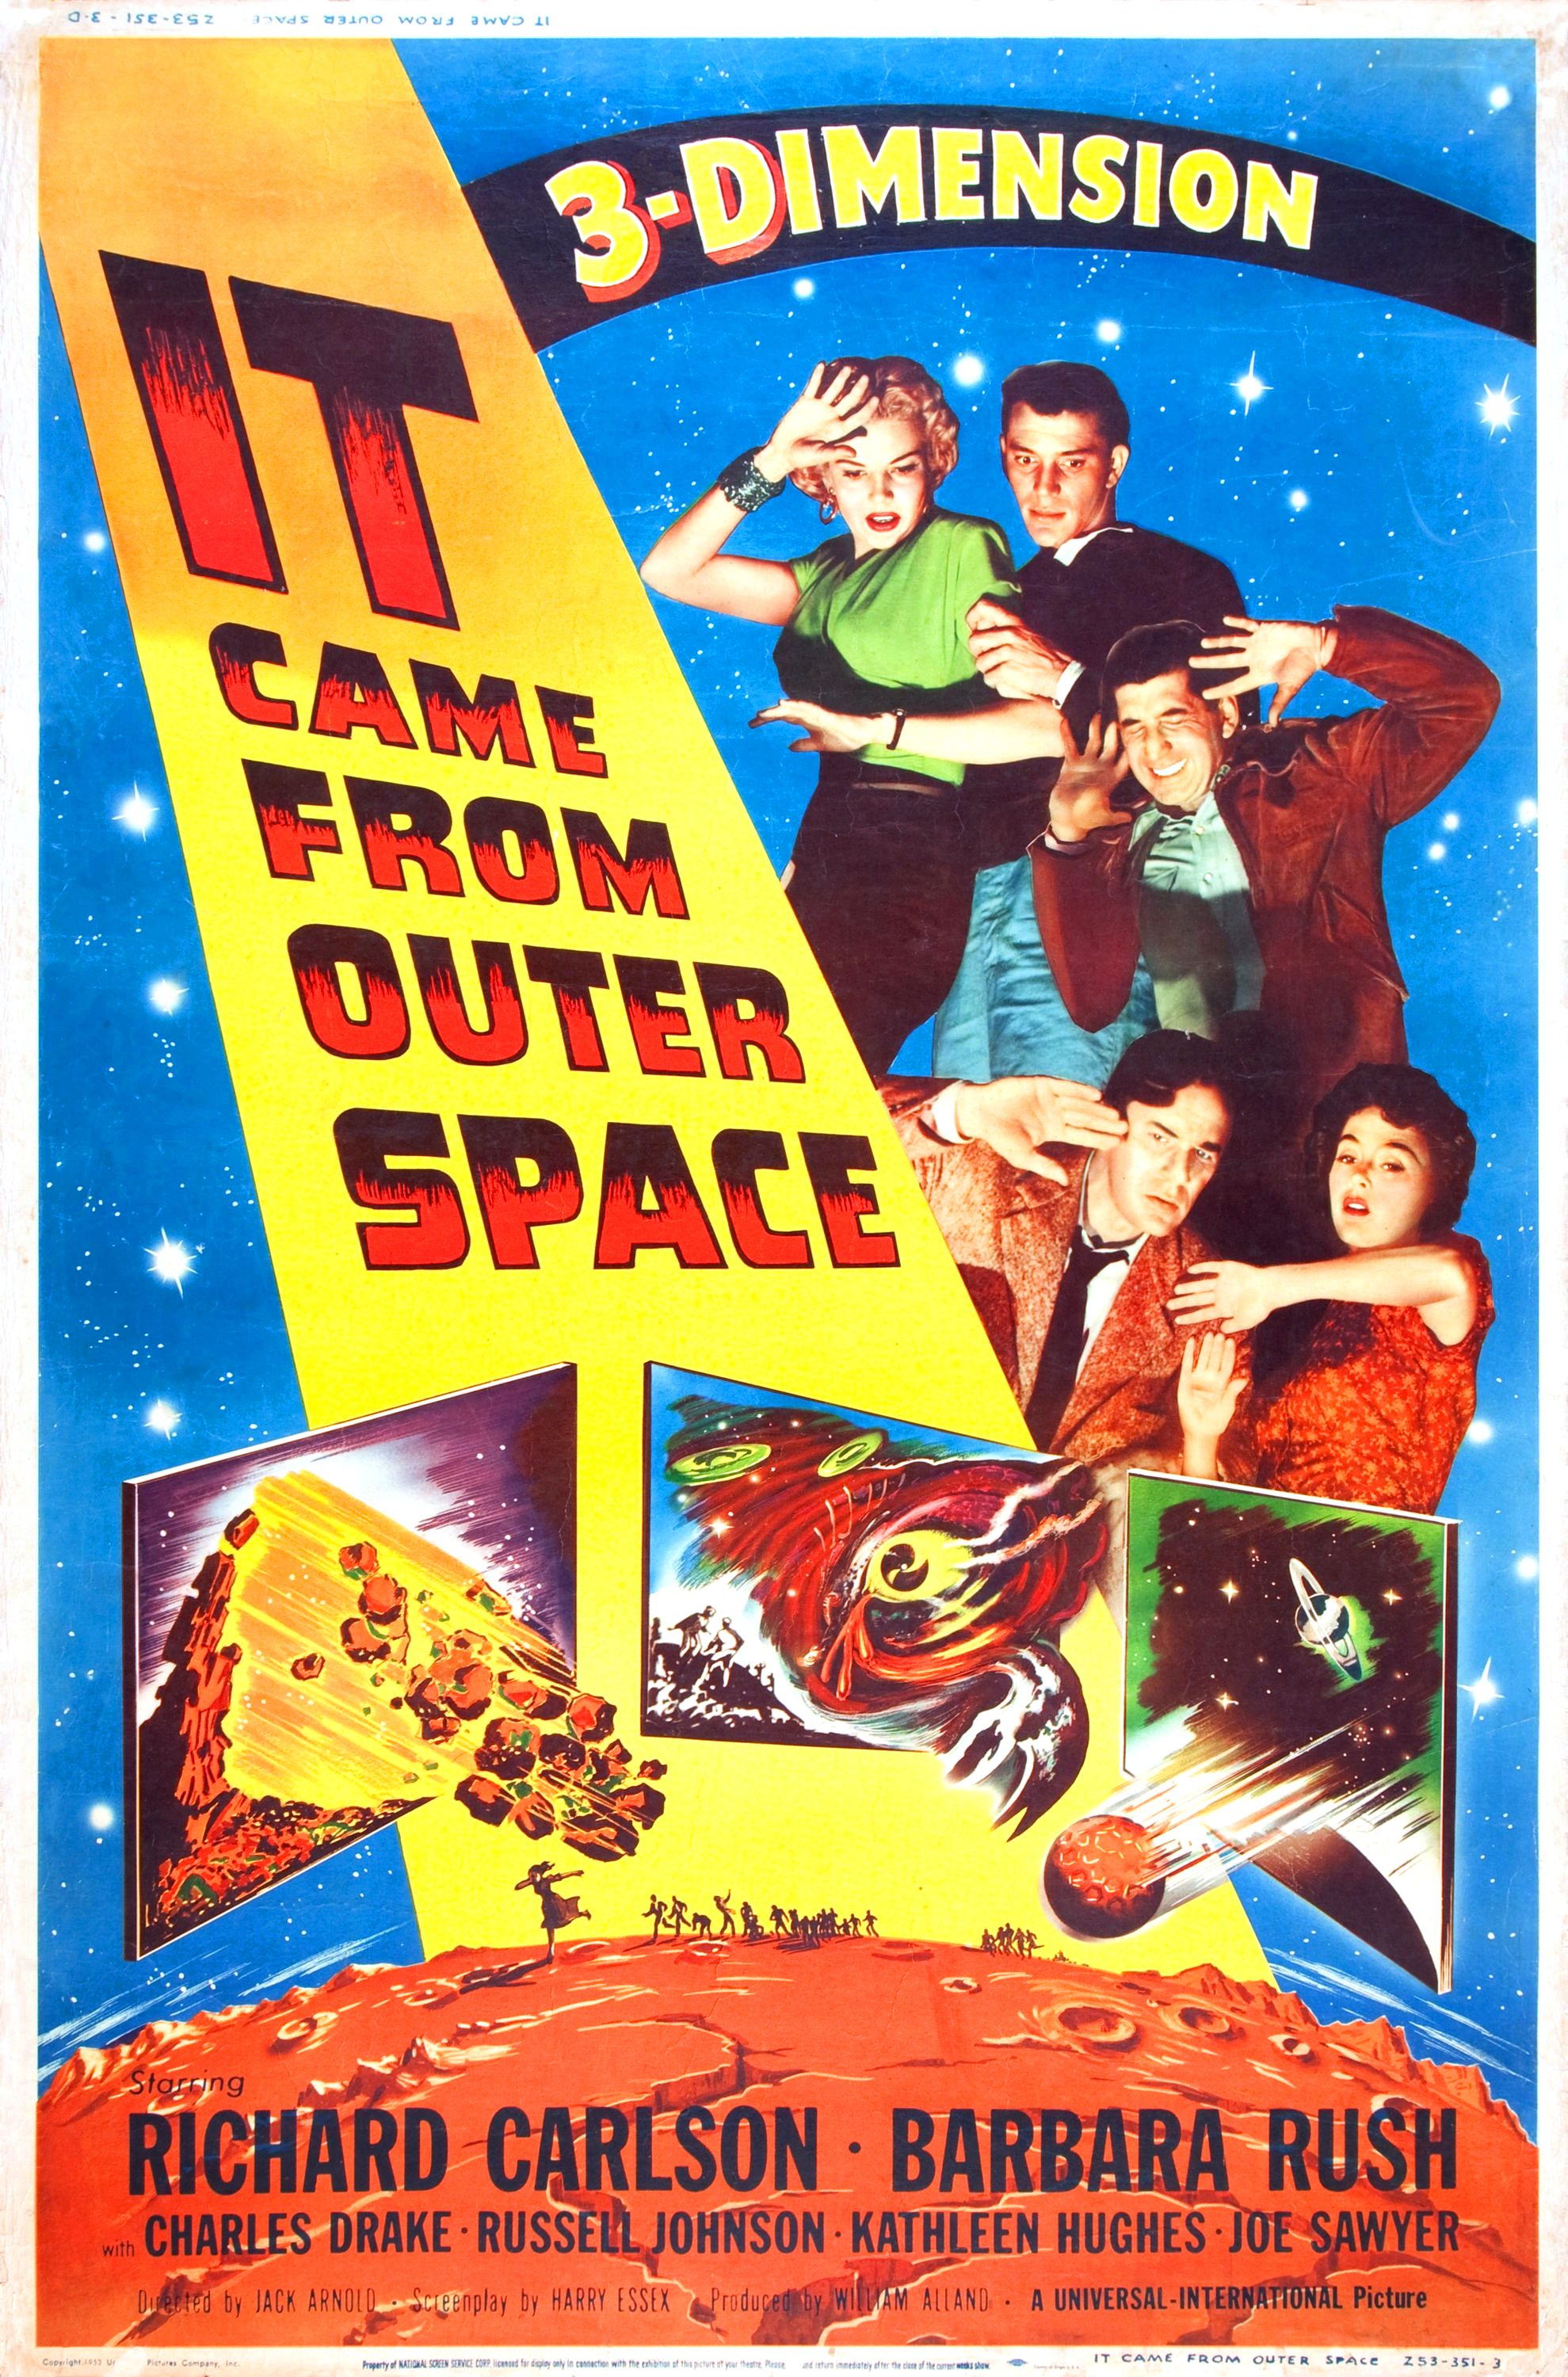 It Came From Outer Space #8